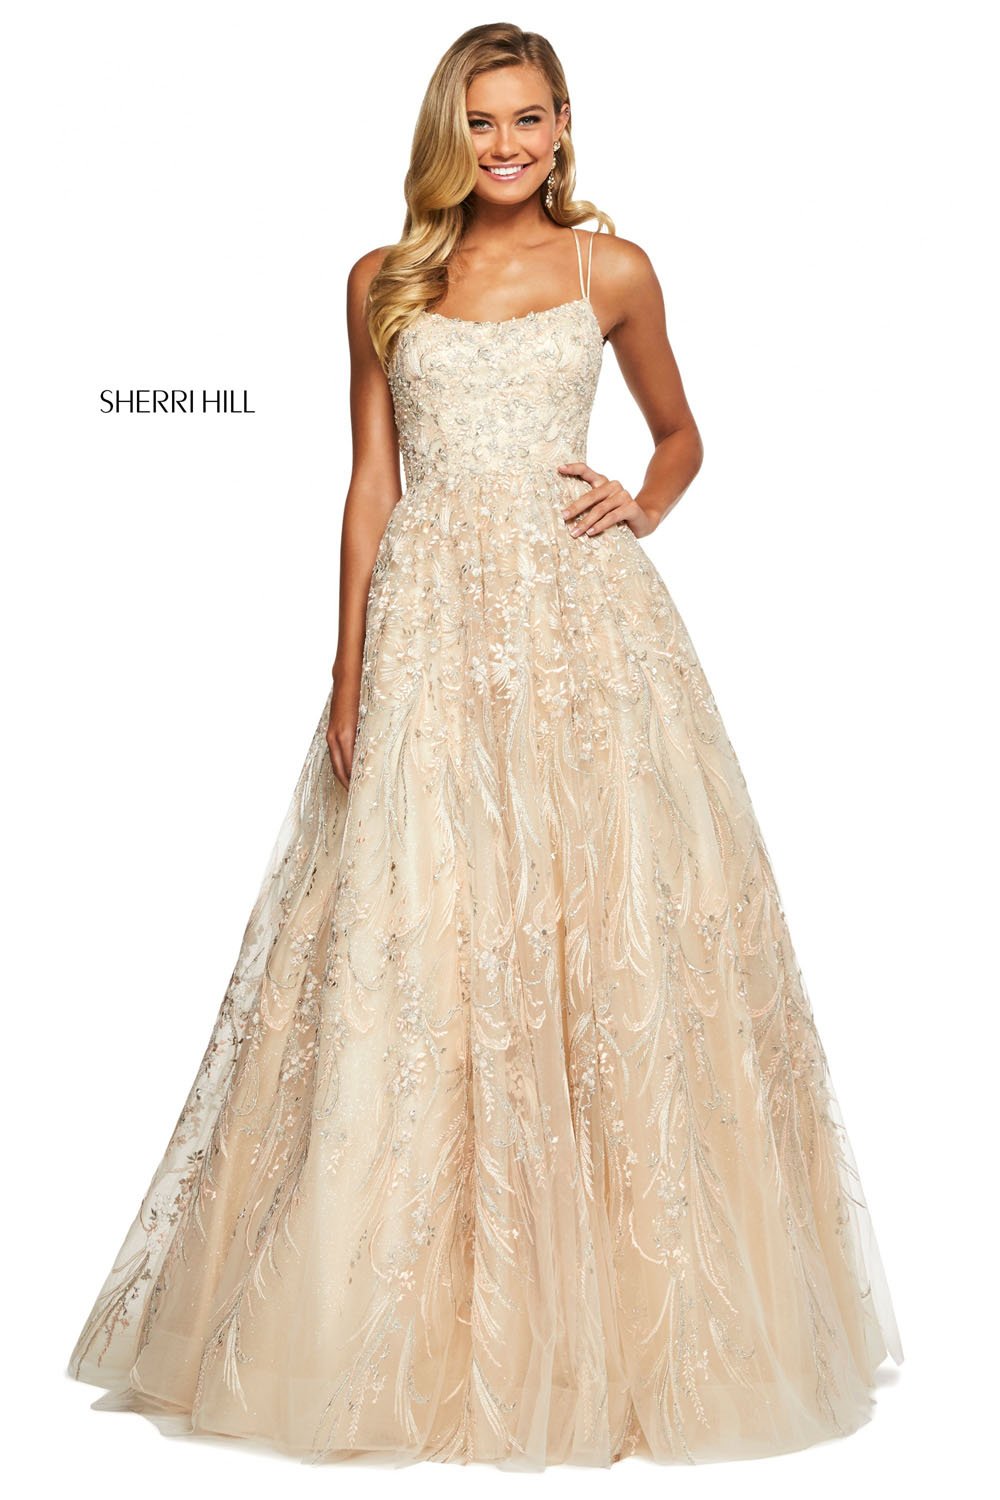 Sherri Hill 53519 dress images in these colors: Champagne, Periwinkle, Light Blue, Blush.